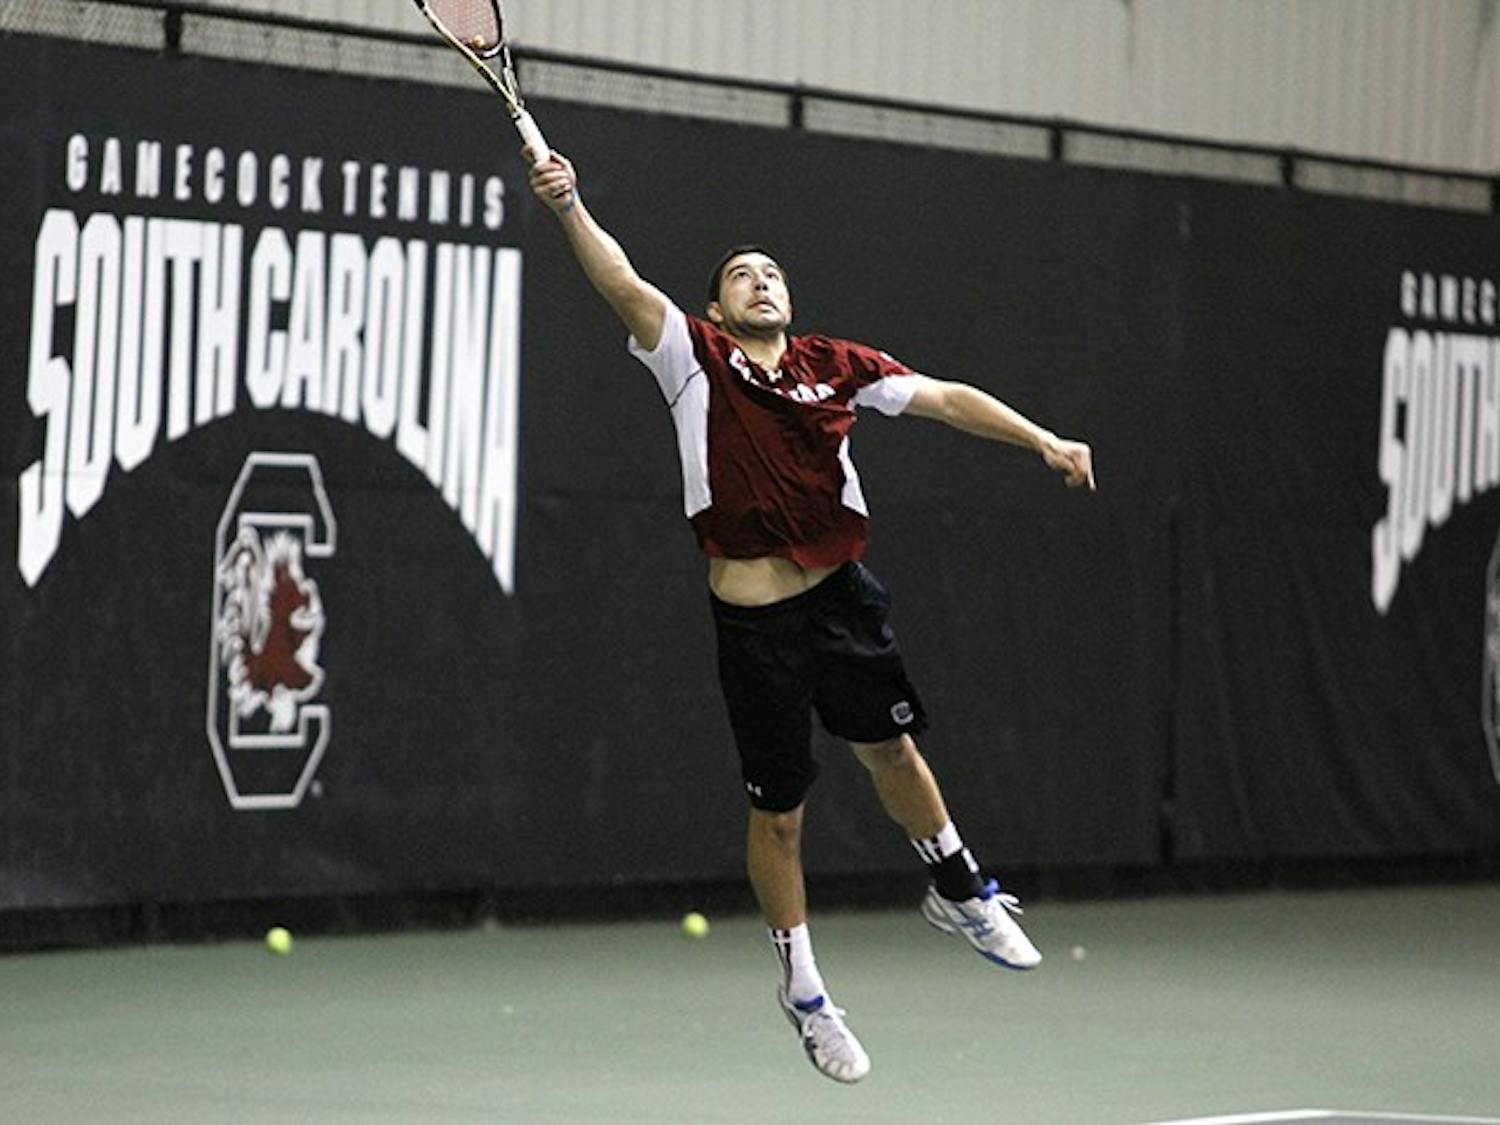 	Seniors Tsvetan Mihov (pictured) and Chip Cox were the two seniors on the South Carolina roster that played their last home game on Sunday.